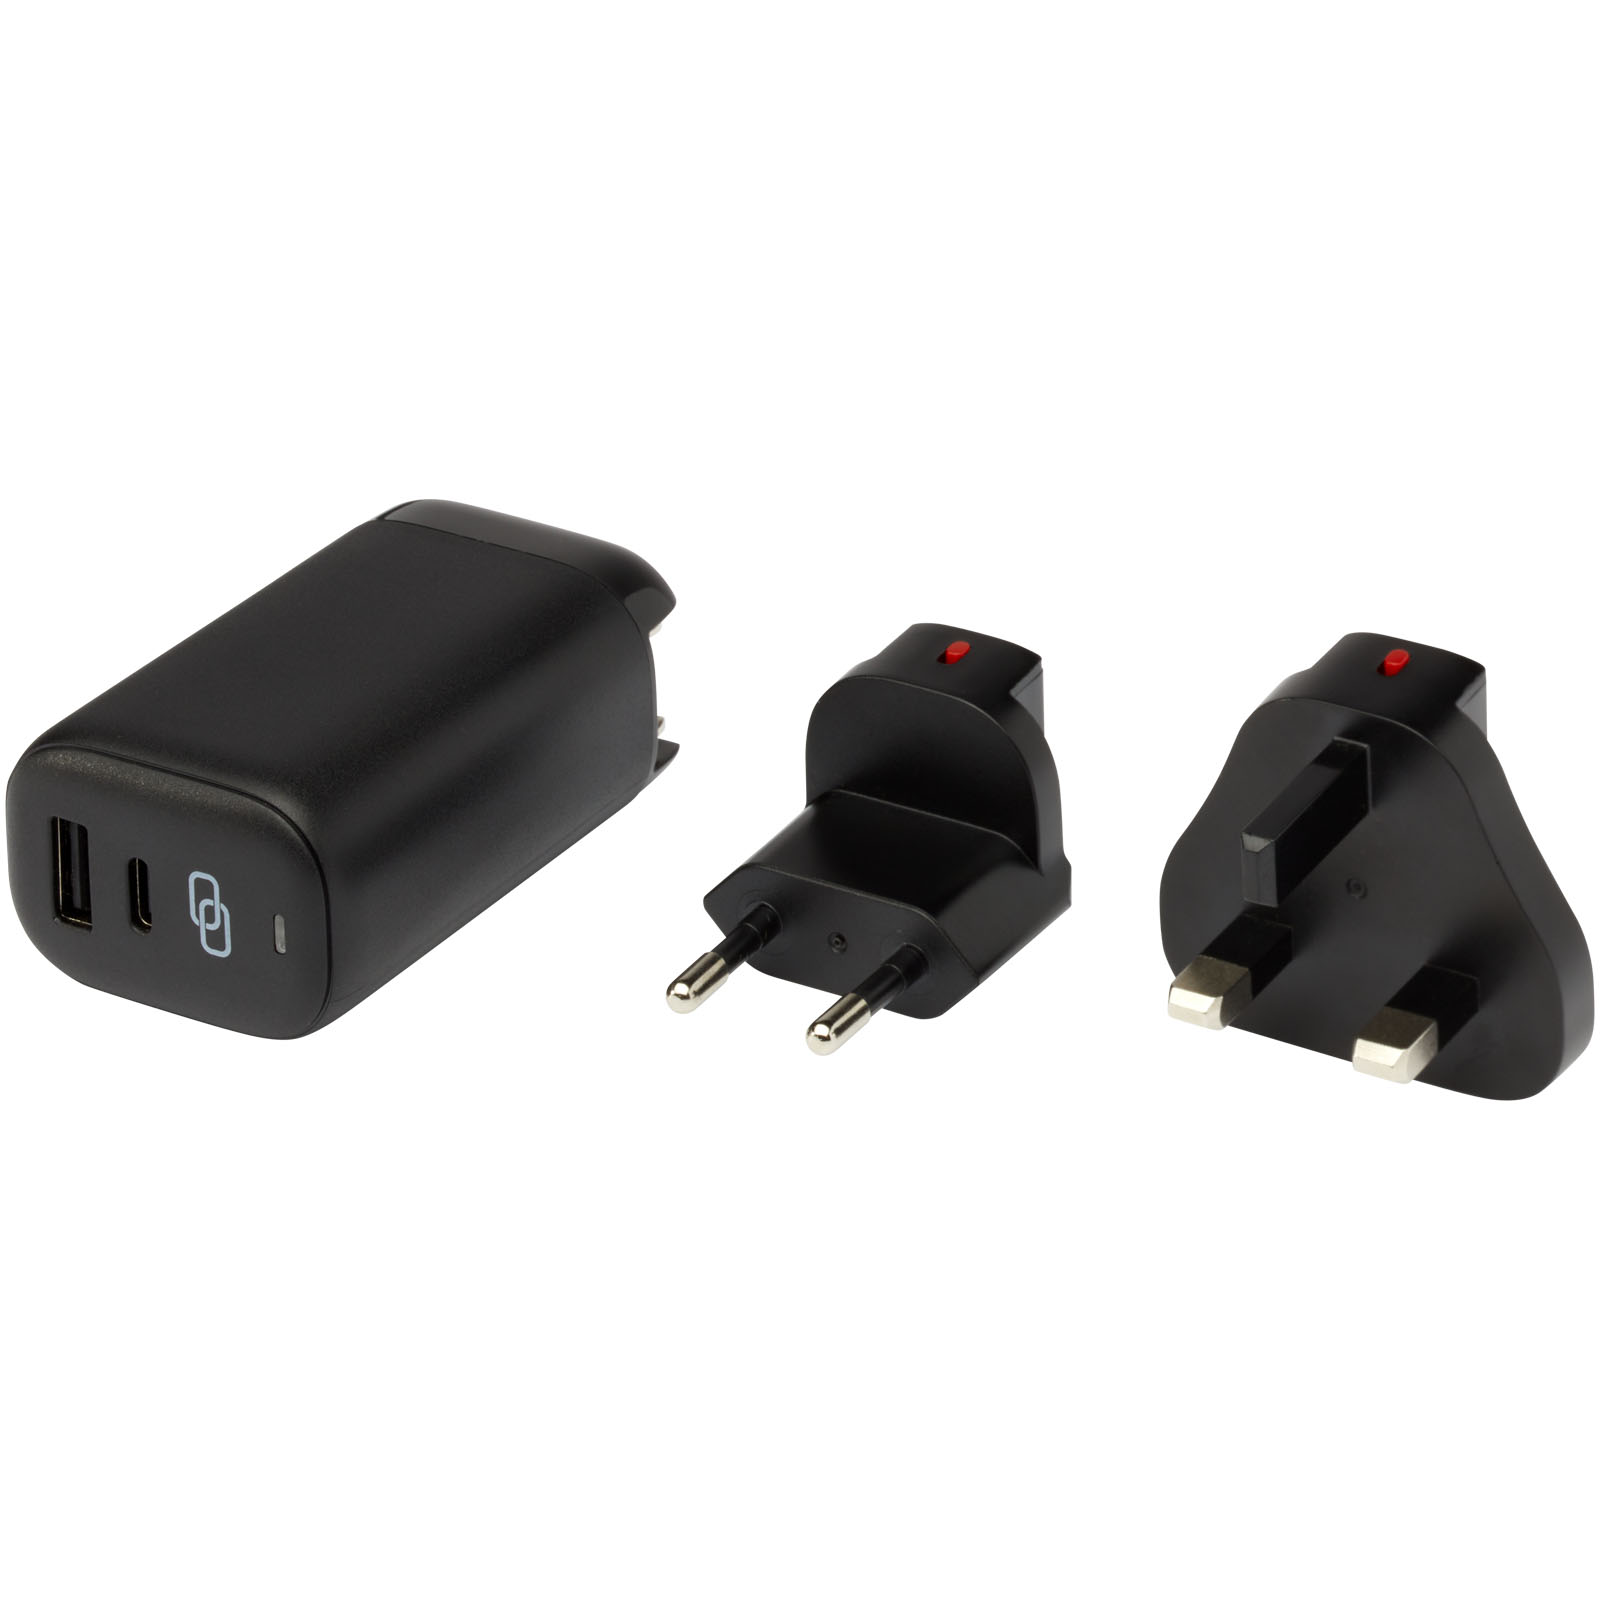 Advertising Chargers - ADAPT 25W recycled plastic PD travel charger